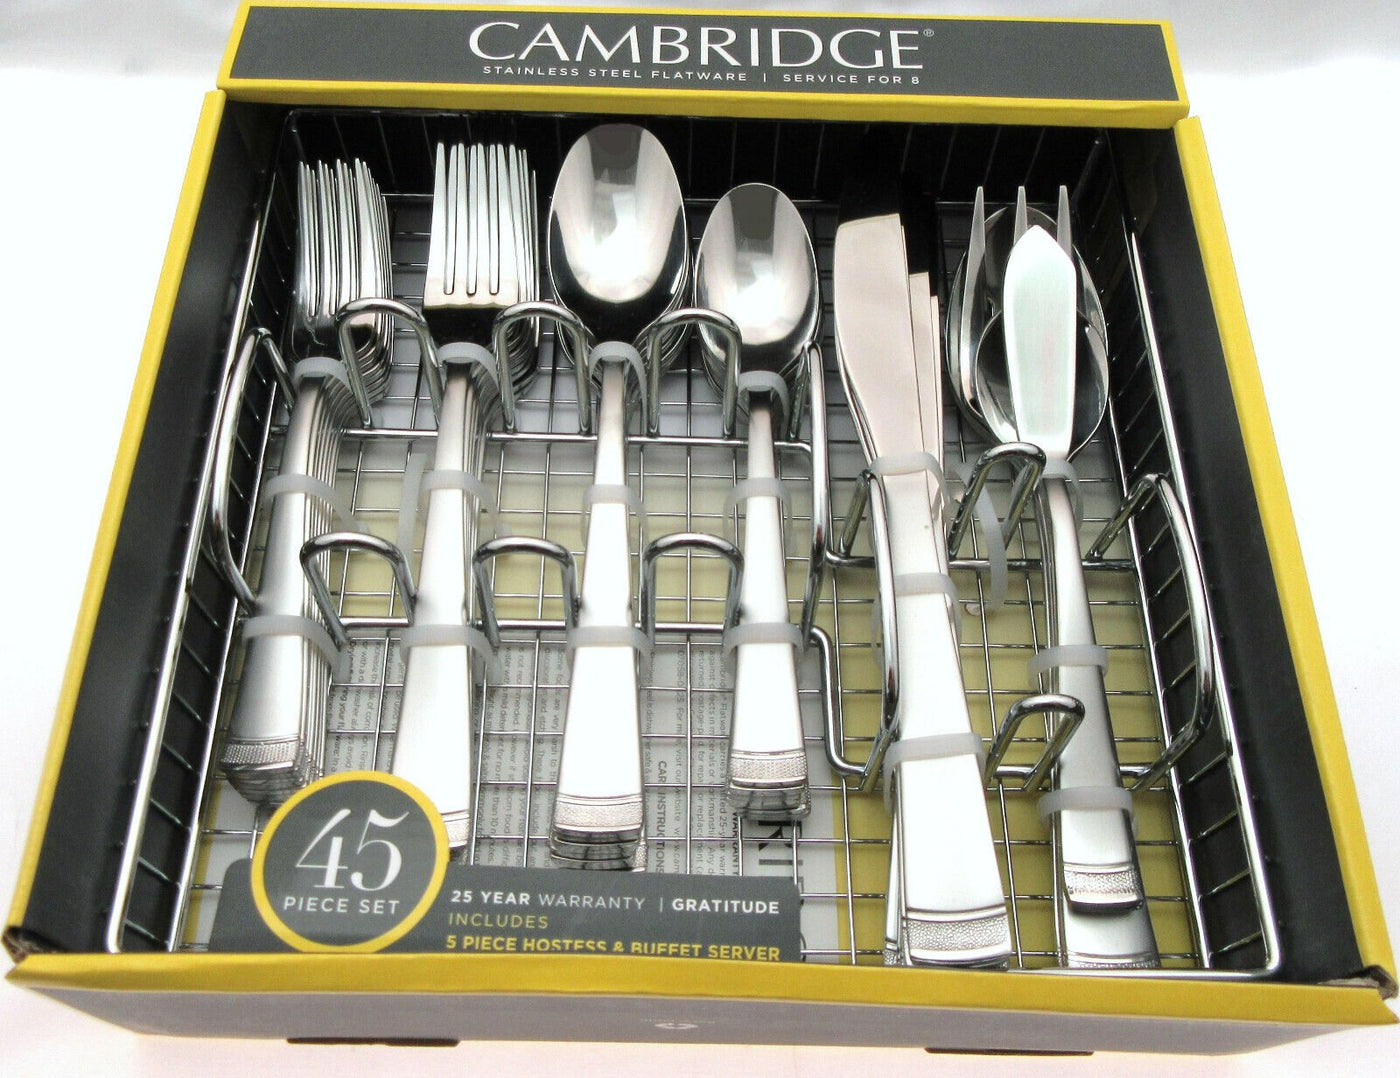 Cambridge Stainless Steel Flatware ~ 45 Piece Set ~ Service For 8